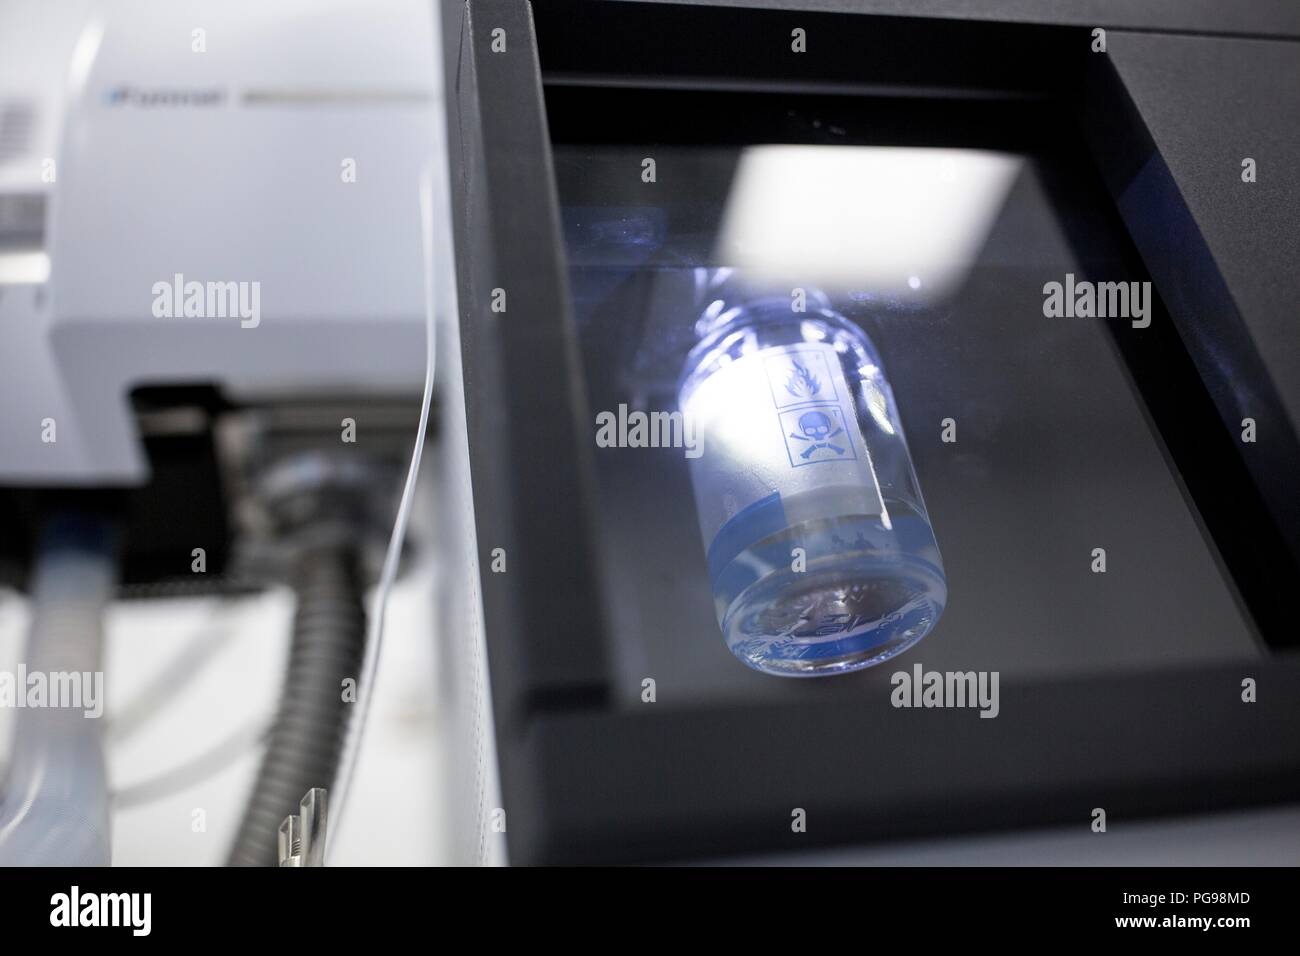 Sample for analysis by liquid chromatography in an autosampler machine. This machine delivers samples to the liquid chromatography machine. Liquid chromatography is used to separate compounds from a mixture of compounds dissolved in a liquid. Stock Photo